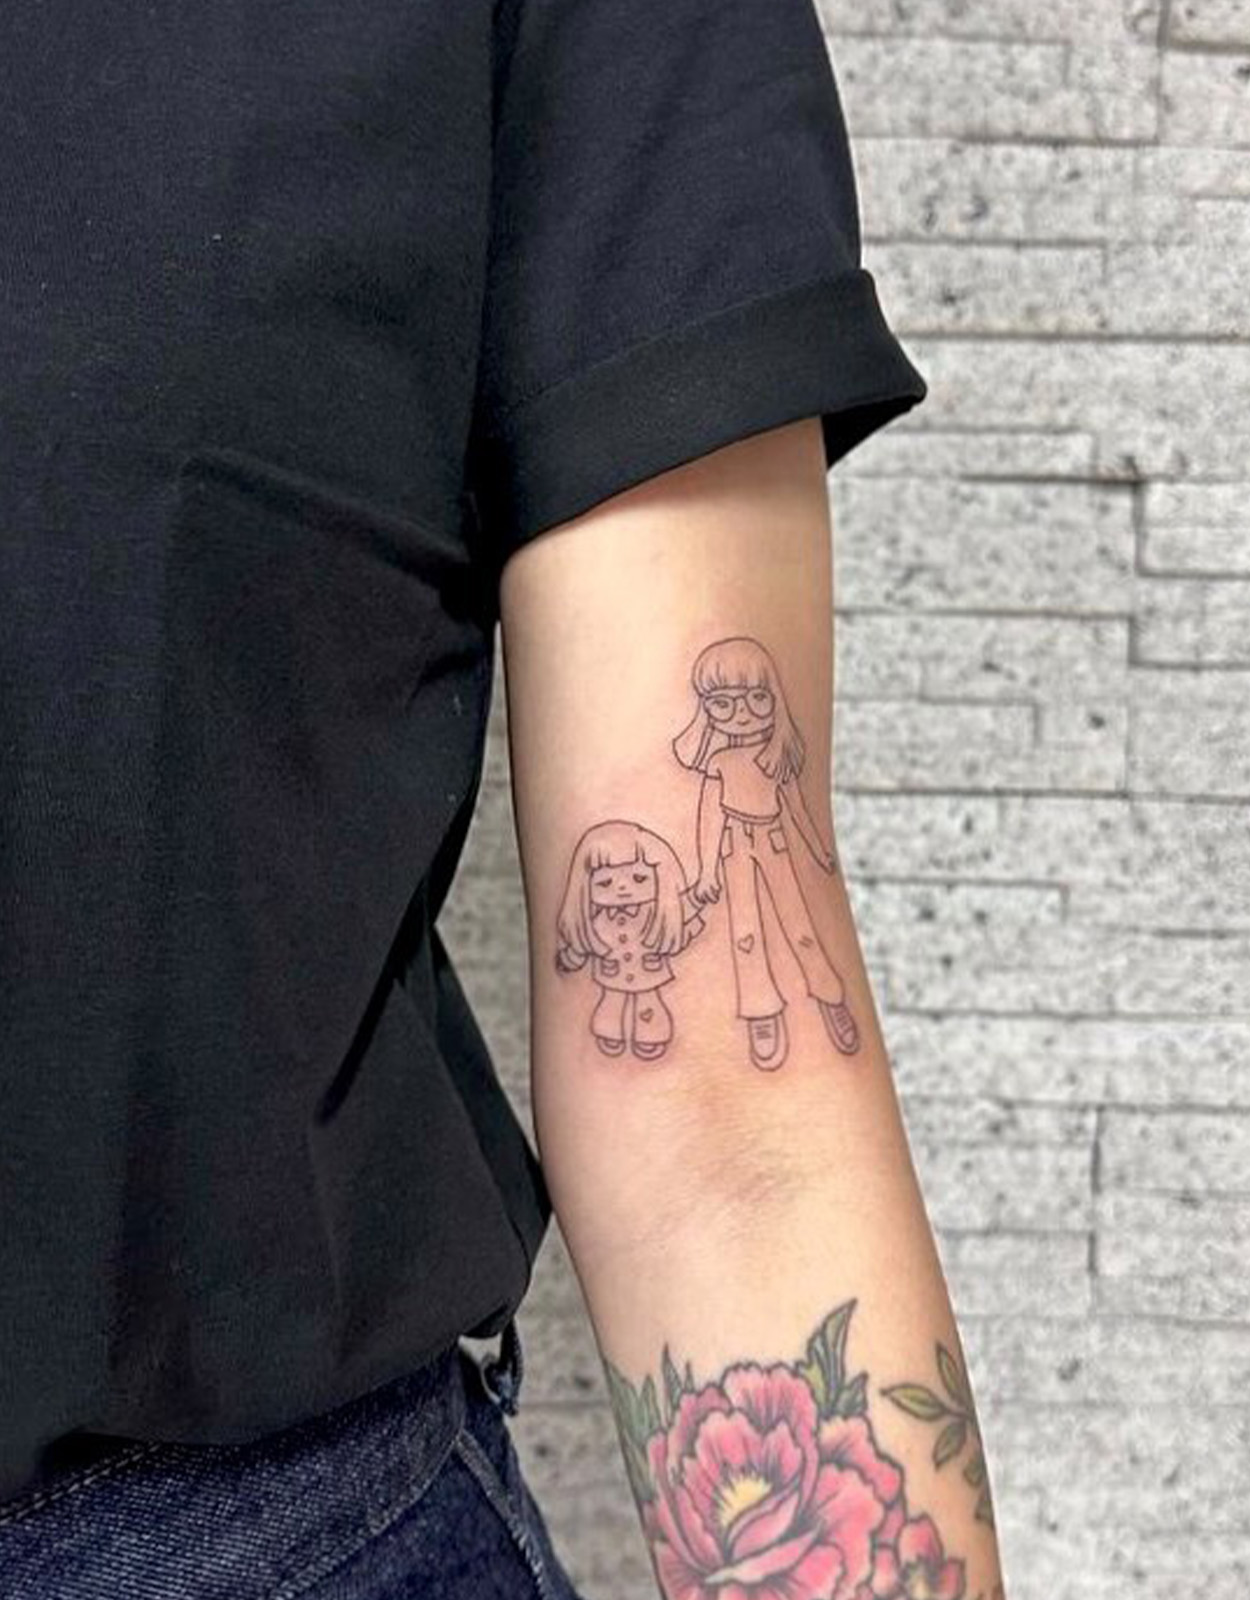 Rina Santos shows her new tattoo of her daughters